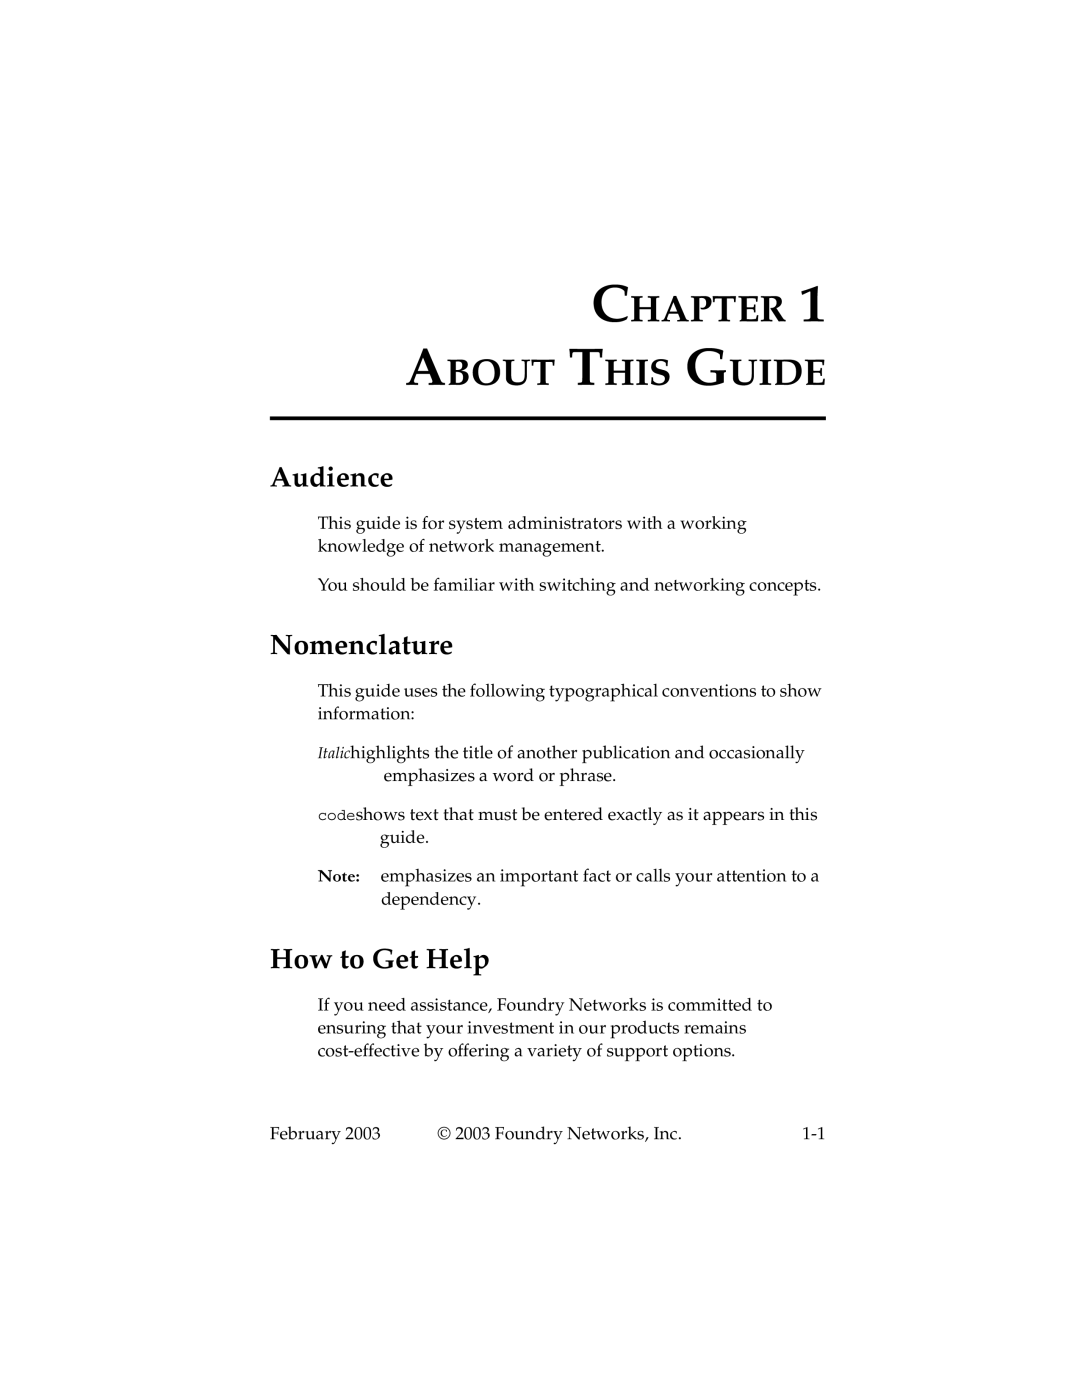 Foundry Networks 2402CF manual About this Guide, Audience, Nomenclature, How to Get Help 